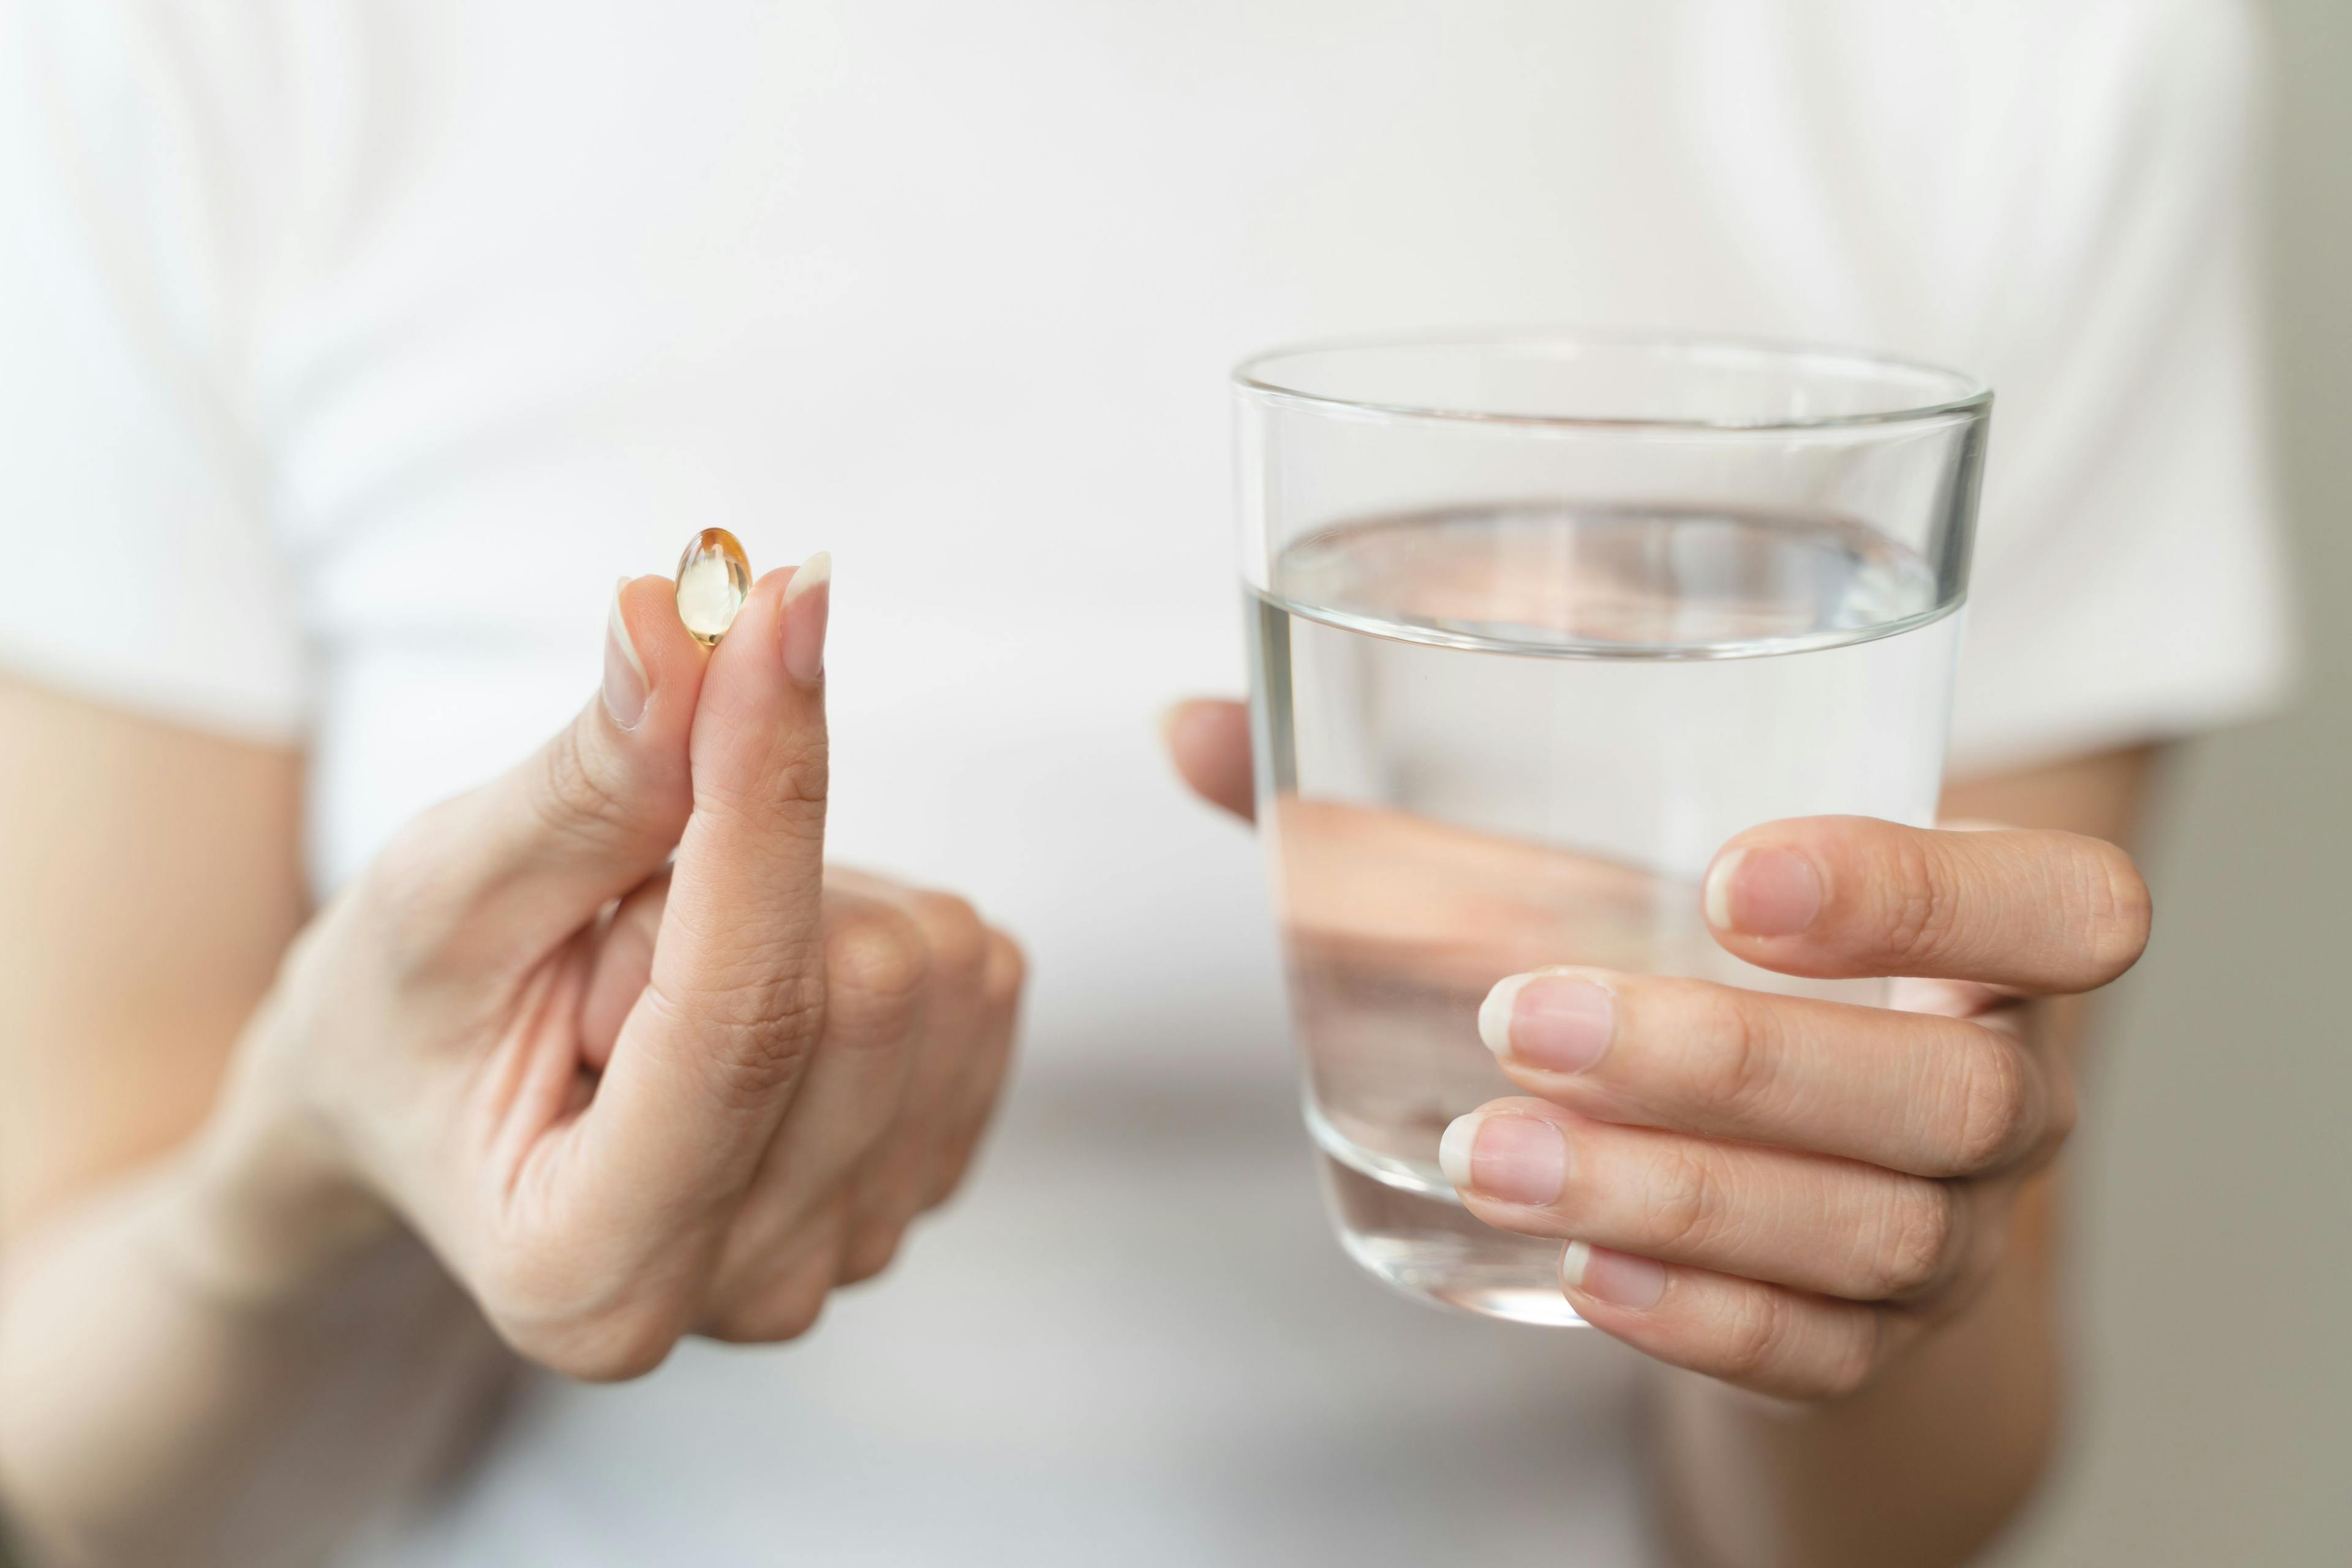 Adult taking a multivitamin with water -- Image credit: Pormezz | stock.adobe.com